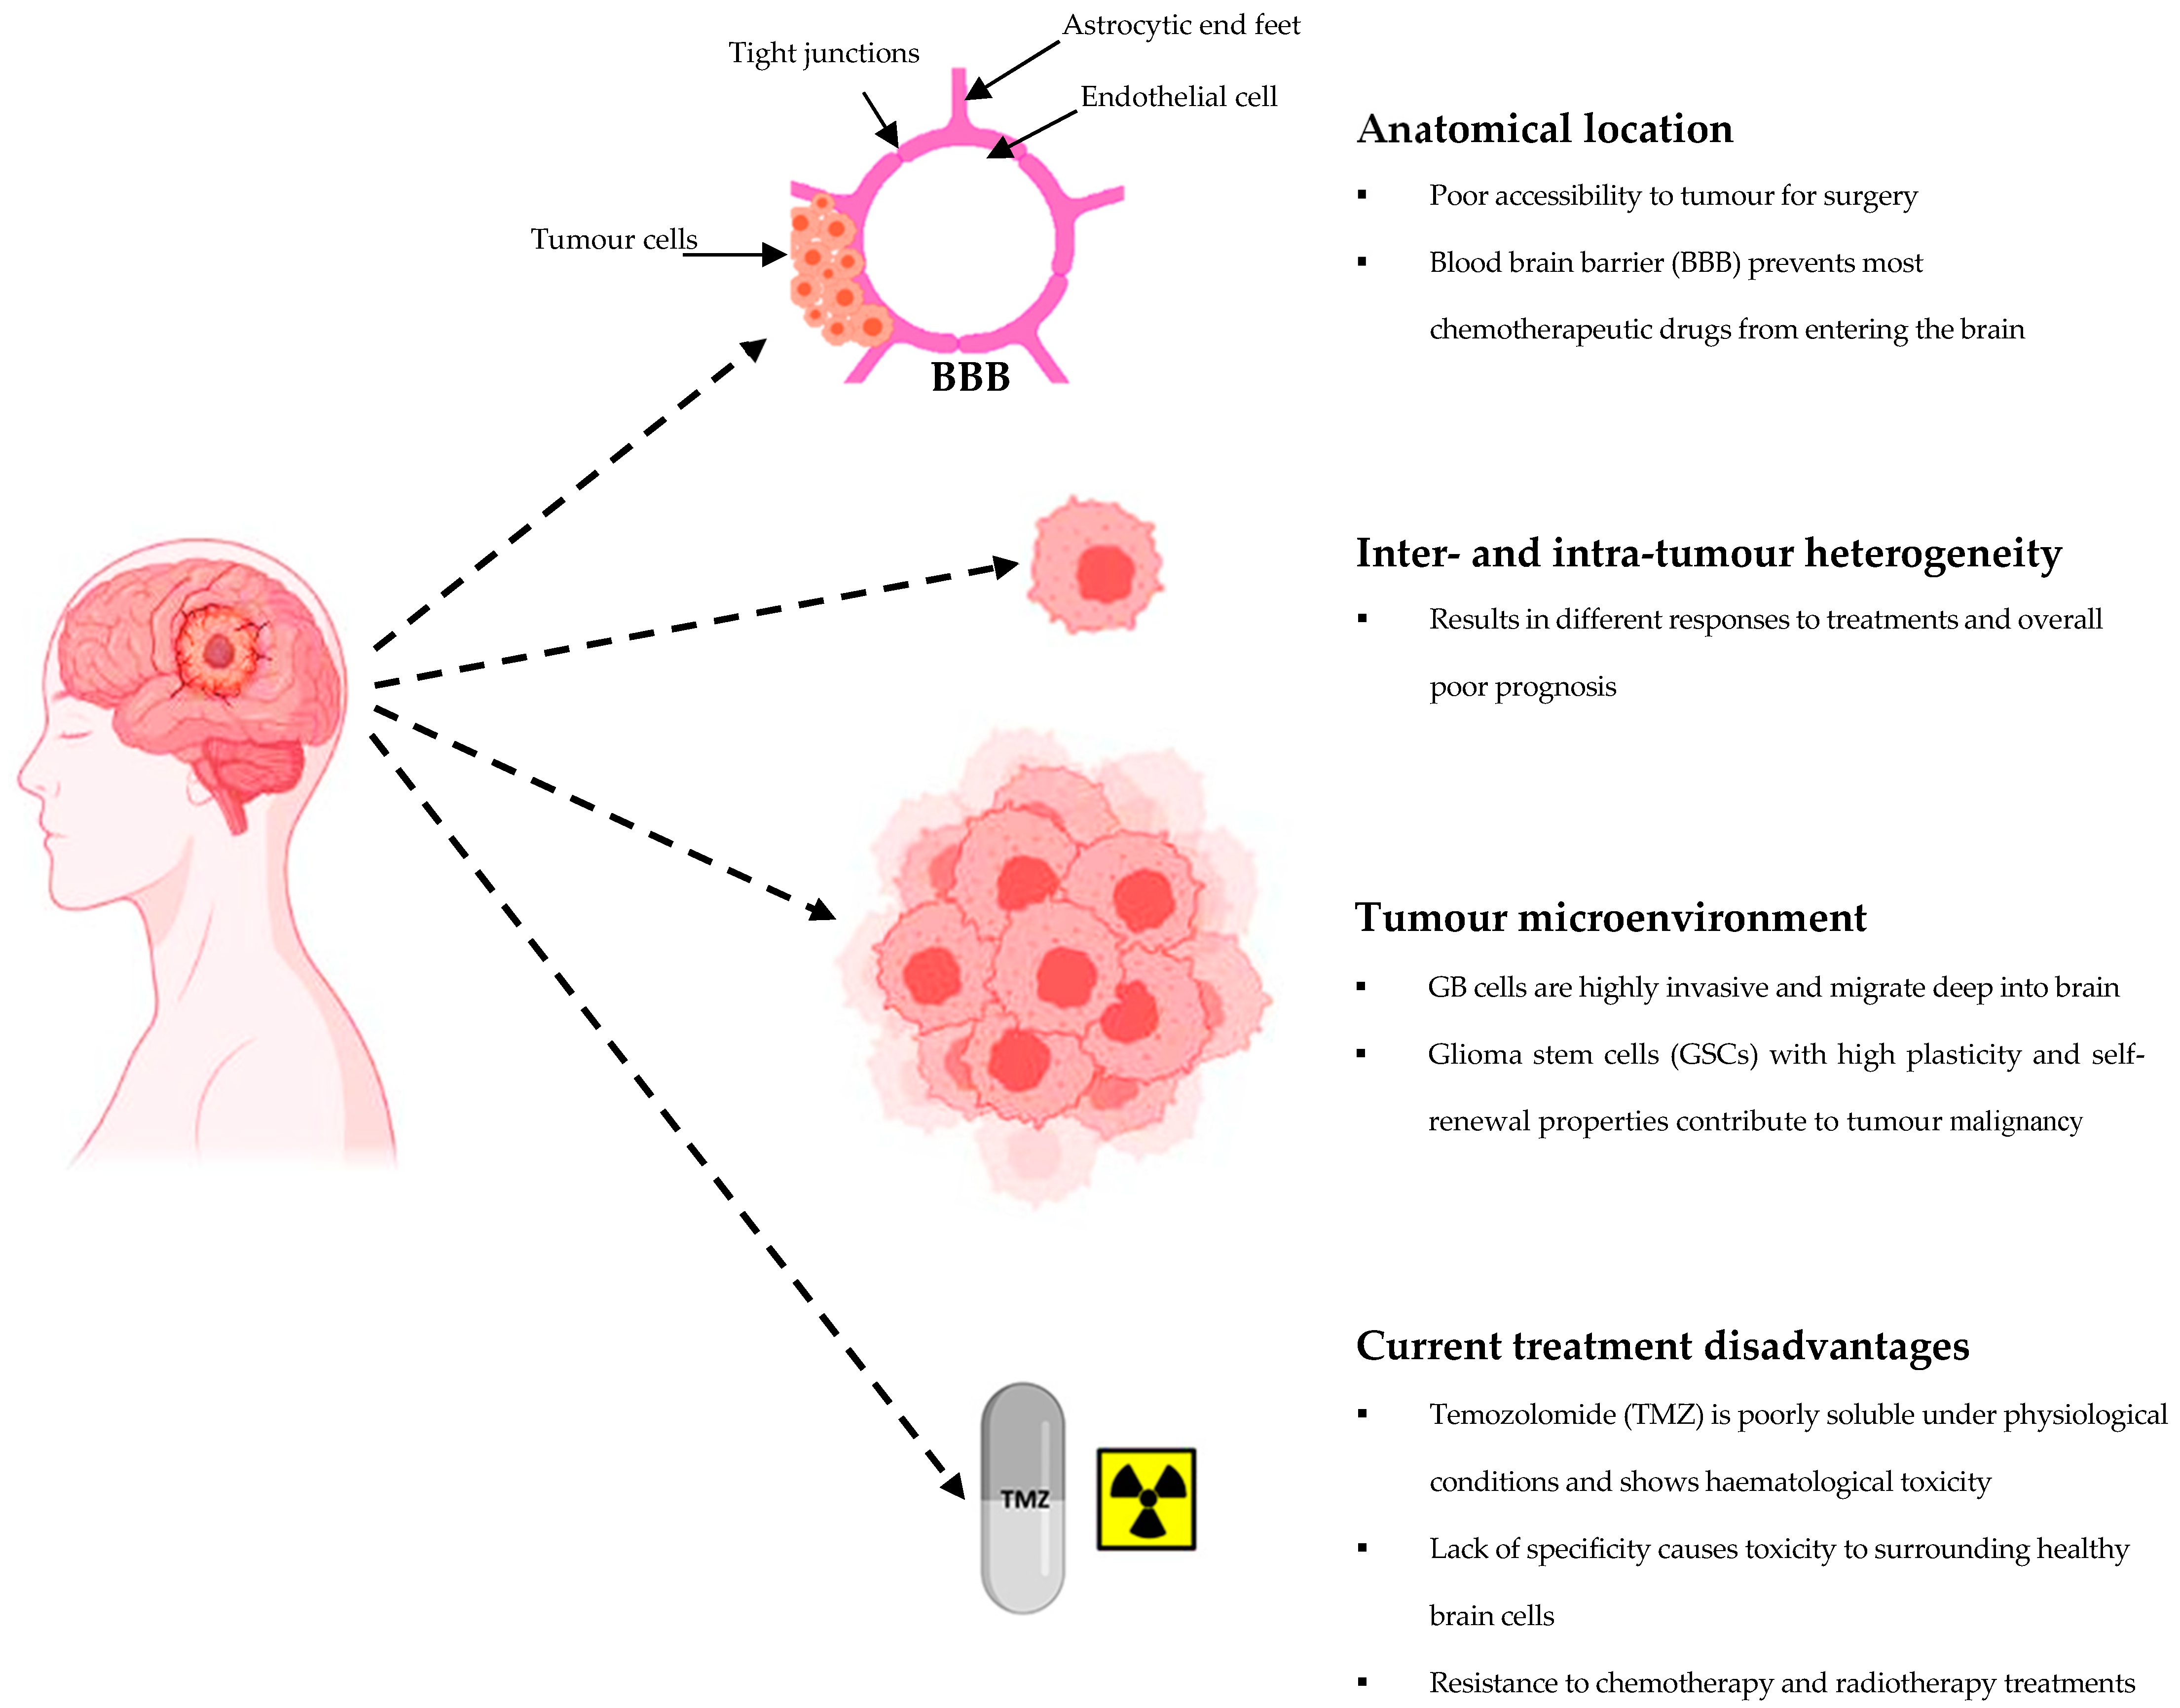 Cancers | Free Full-Text | Diagnostic and Therapeutic Approaches for  Glioblastoma and Neuroblastoma Cancers Using Chlorotoxin Nanoparticles